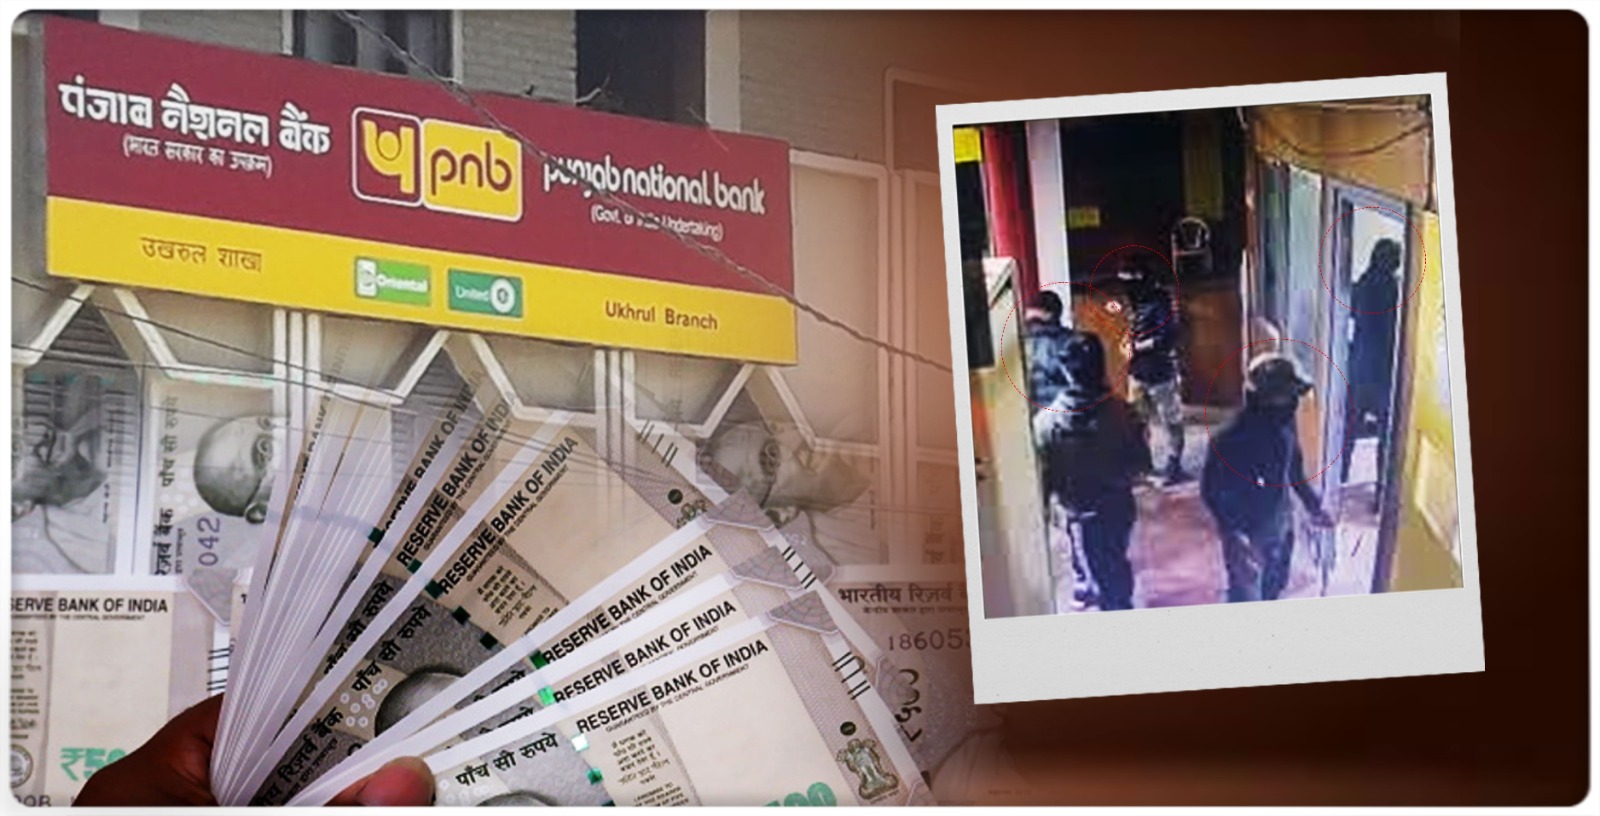 rs-1885-crore-looted-from-punjab-national-bank-in-manipur